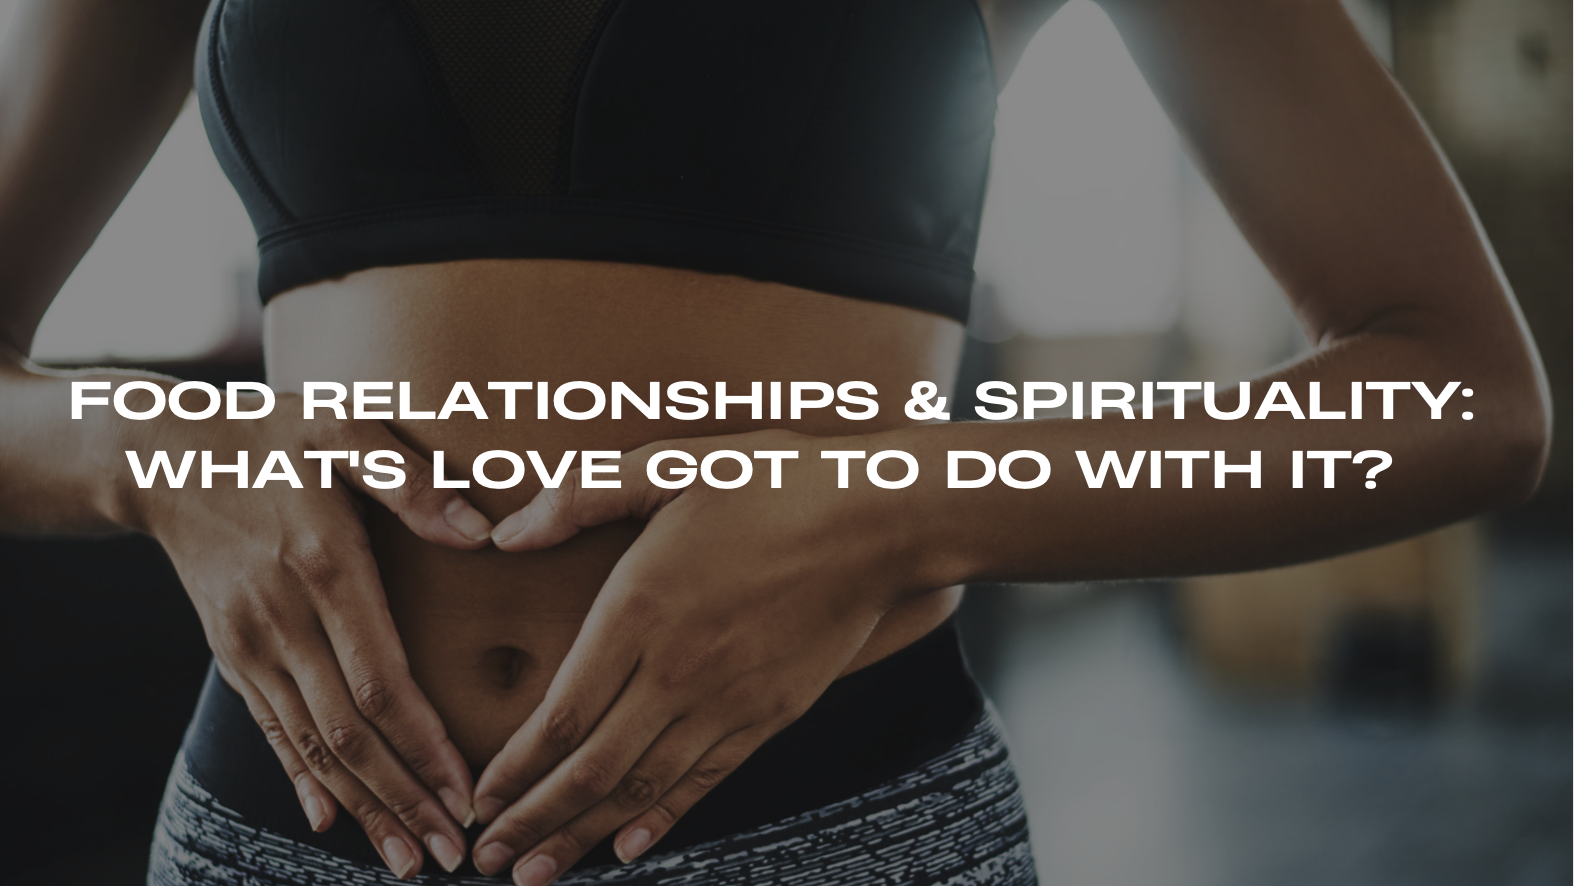 Food, Relationships, and Spirituality: What’s LOVE got to do with it?